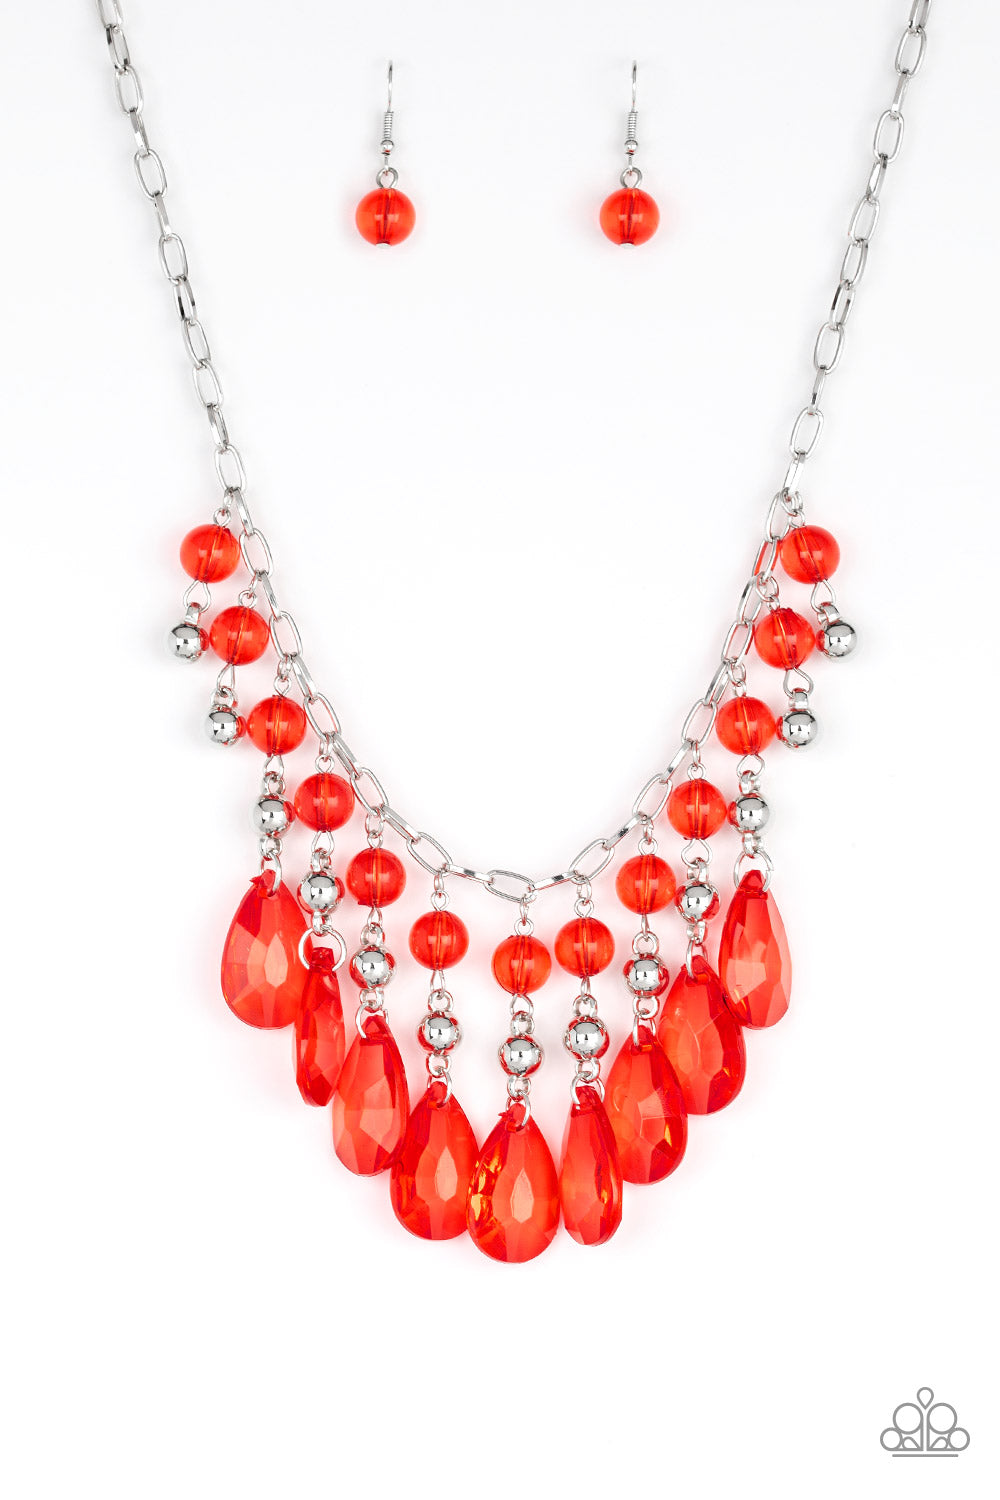 Beauty School Drop Out Red Paparazzi Necklaces Cashmere Pink Jewels - Cashmere Pink Jewels & Accessories, Cashmere Pink Jewels & Accessories - Paparazzi